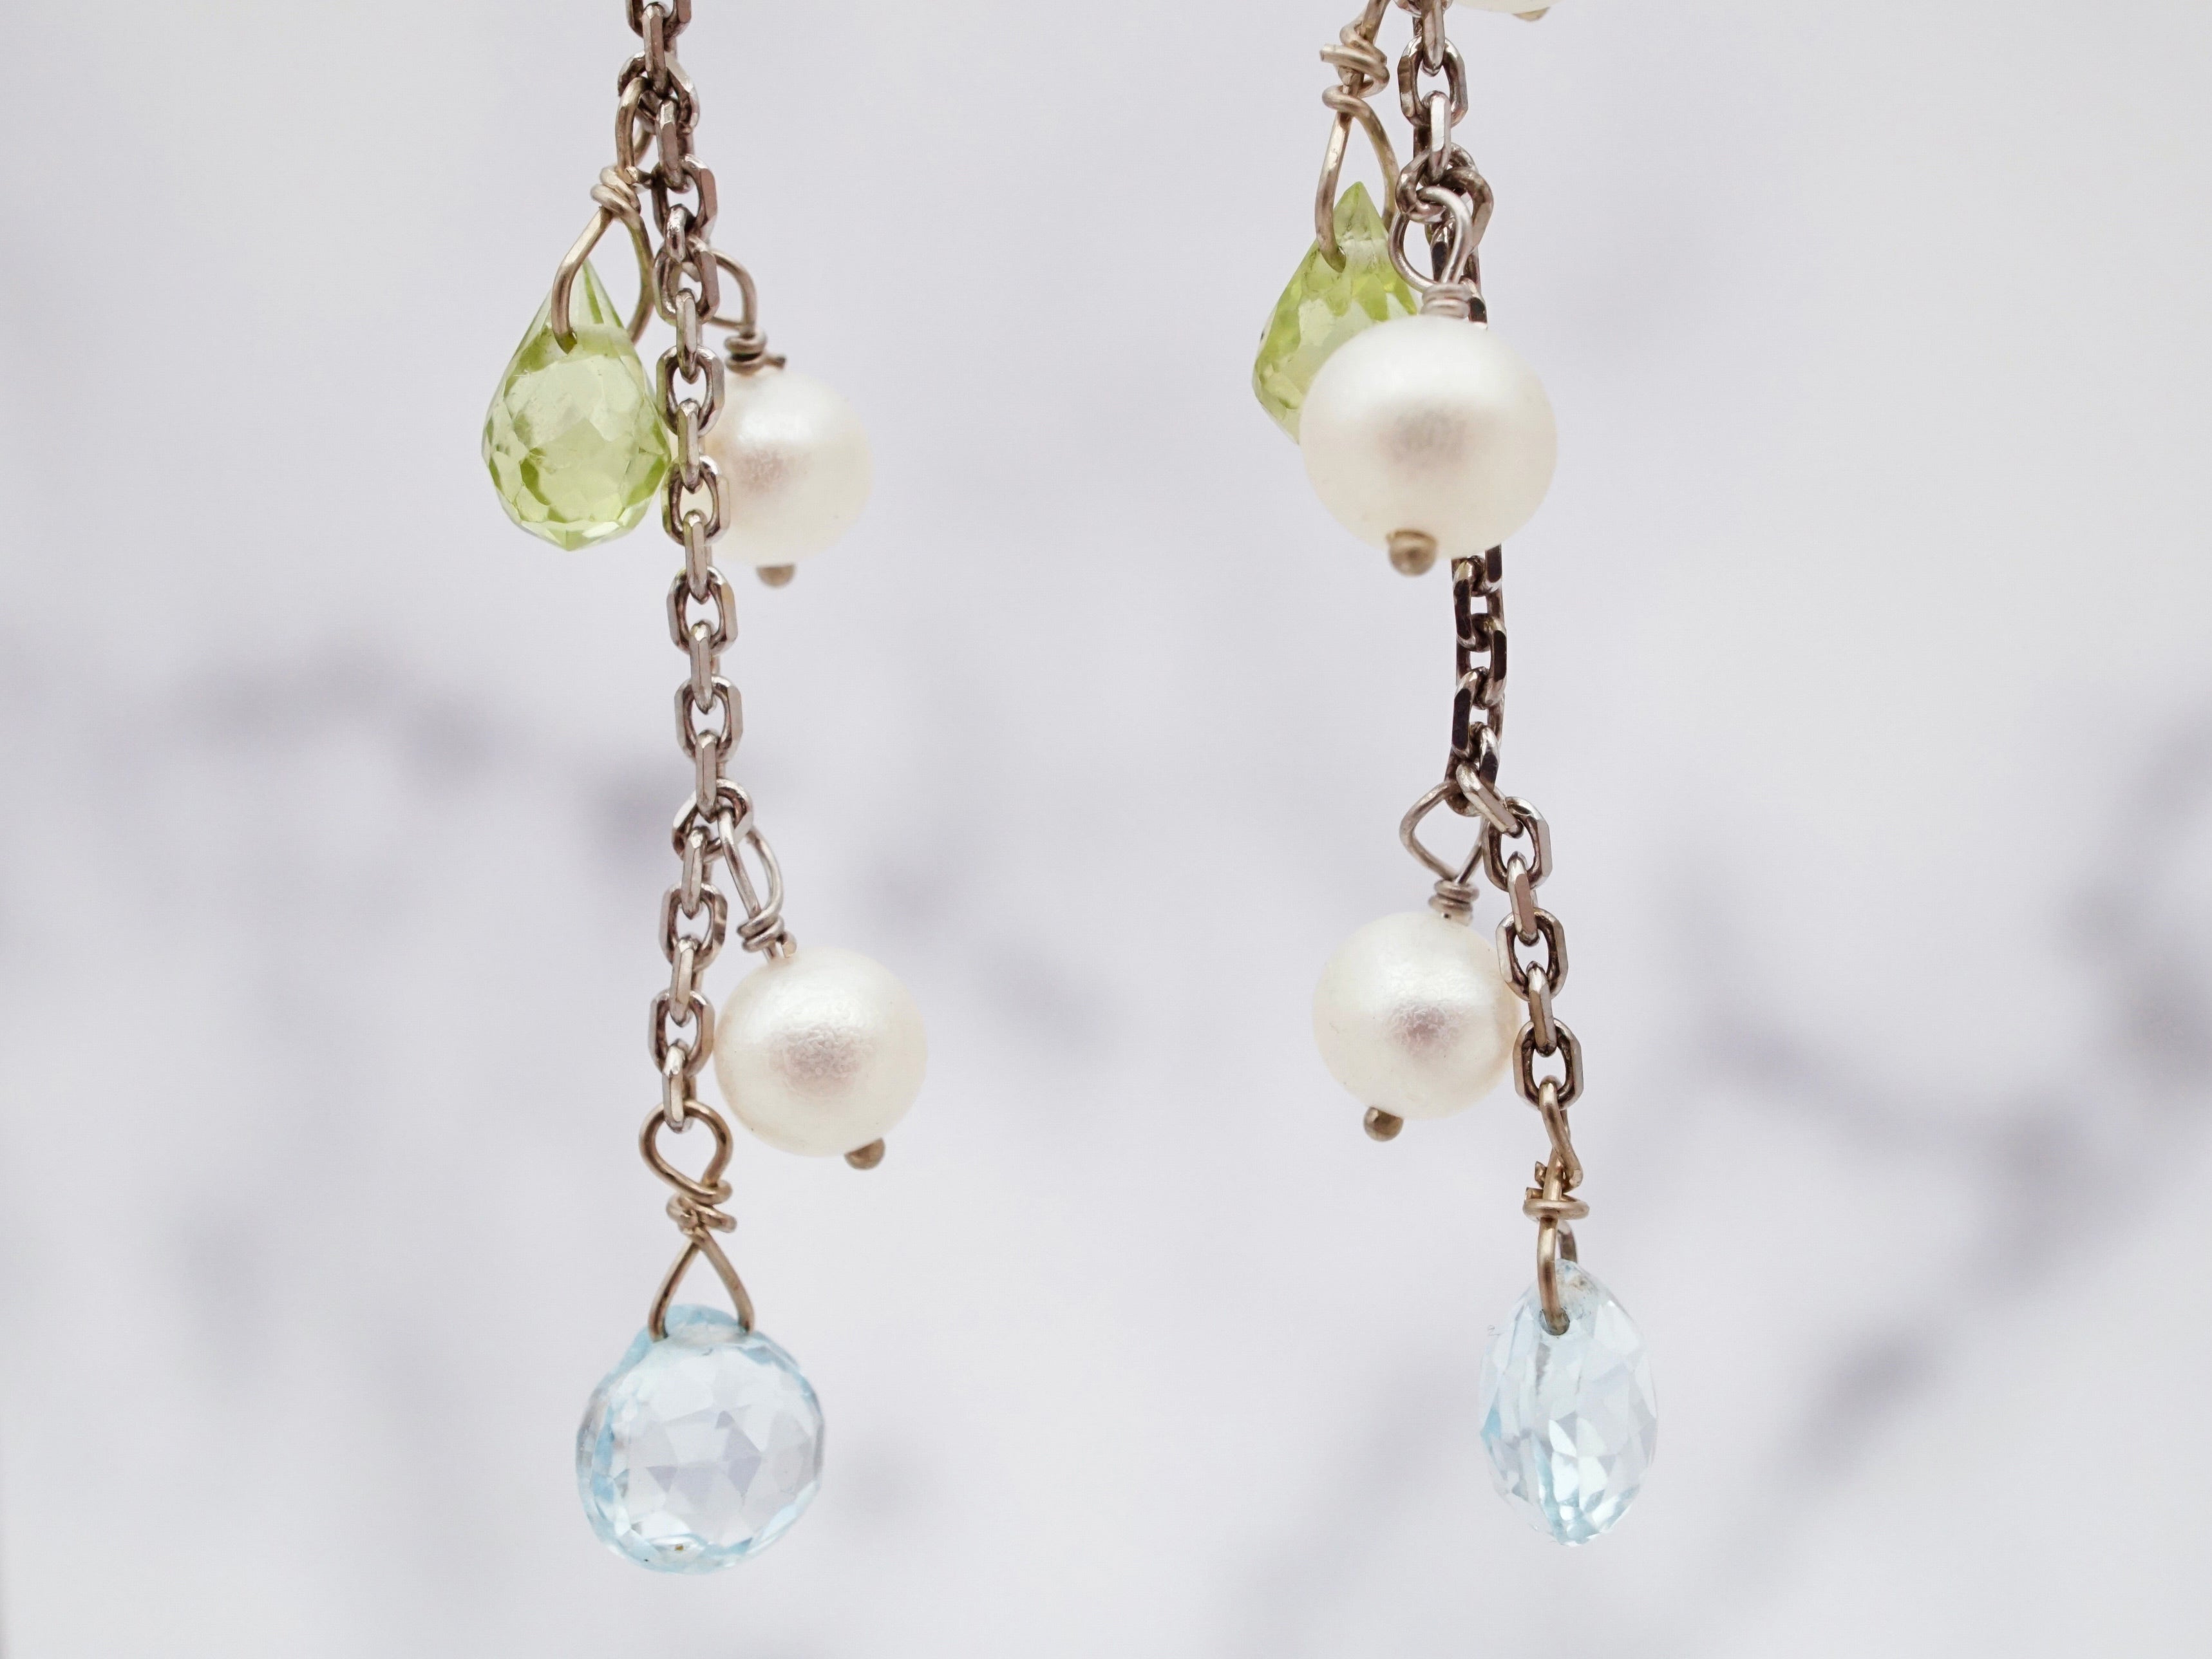 Vintage 14k white gold, cultured pearl, faceted peridot, and blue topaz drop chain earrings